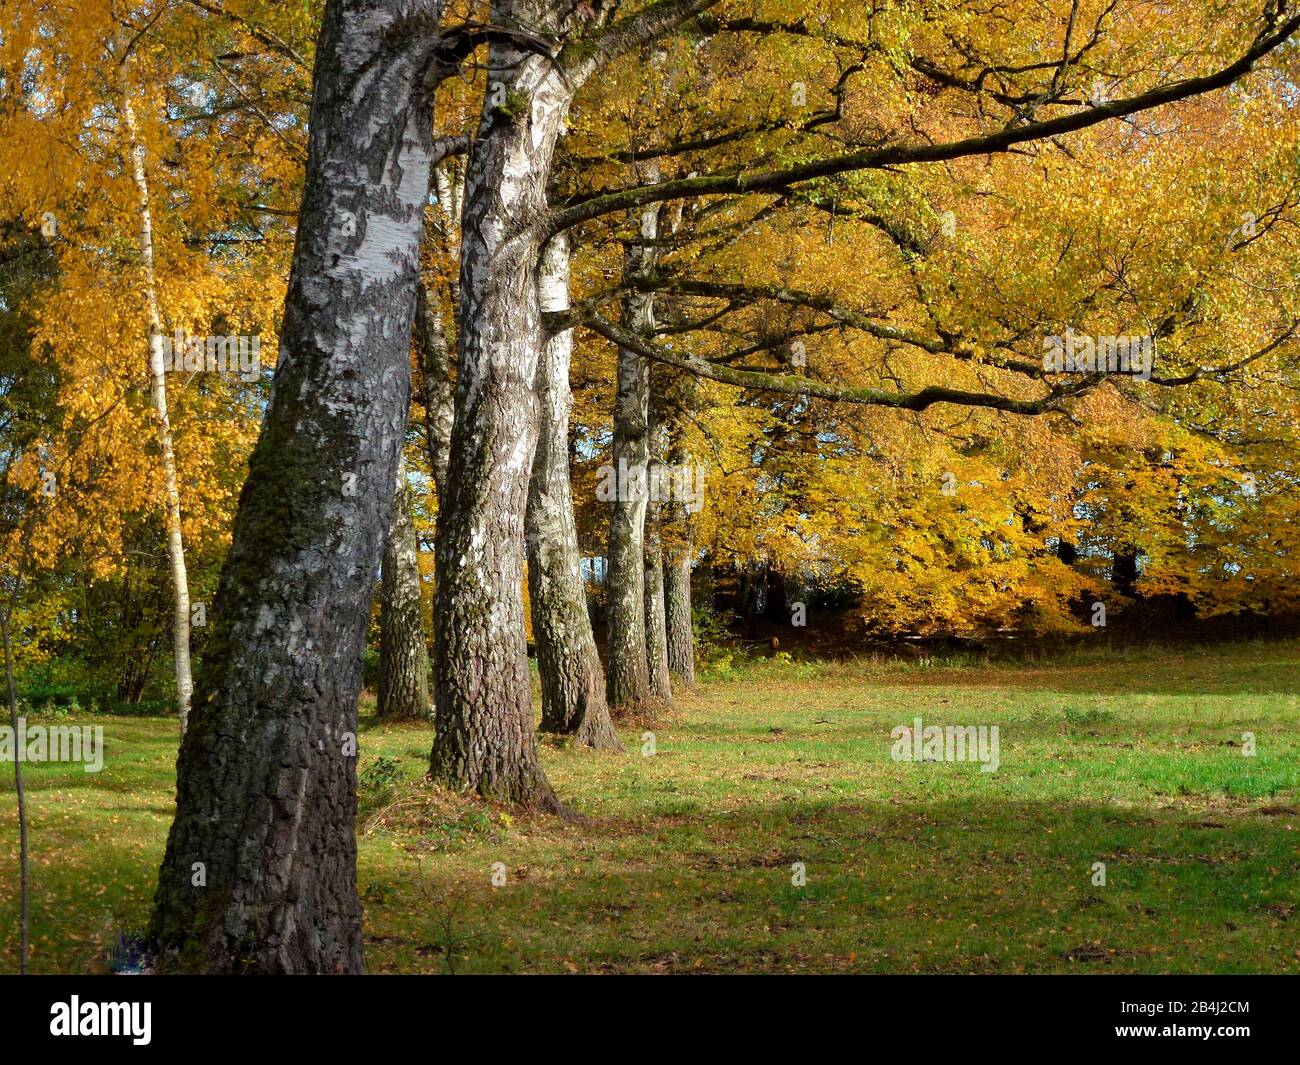 Germany, Bavaria, Eching am Ammersee, birches, leaves coloring, autumn Stock Photo